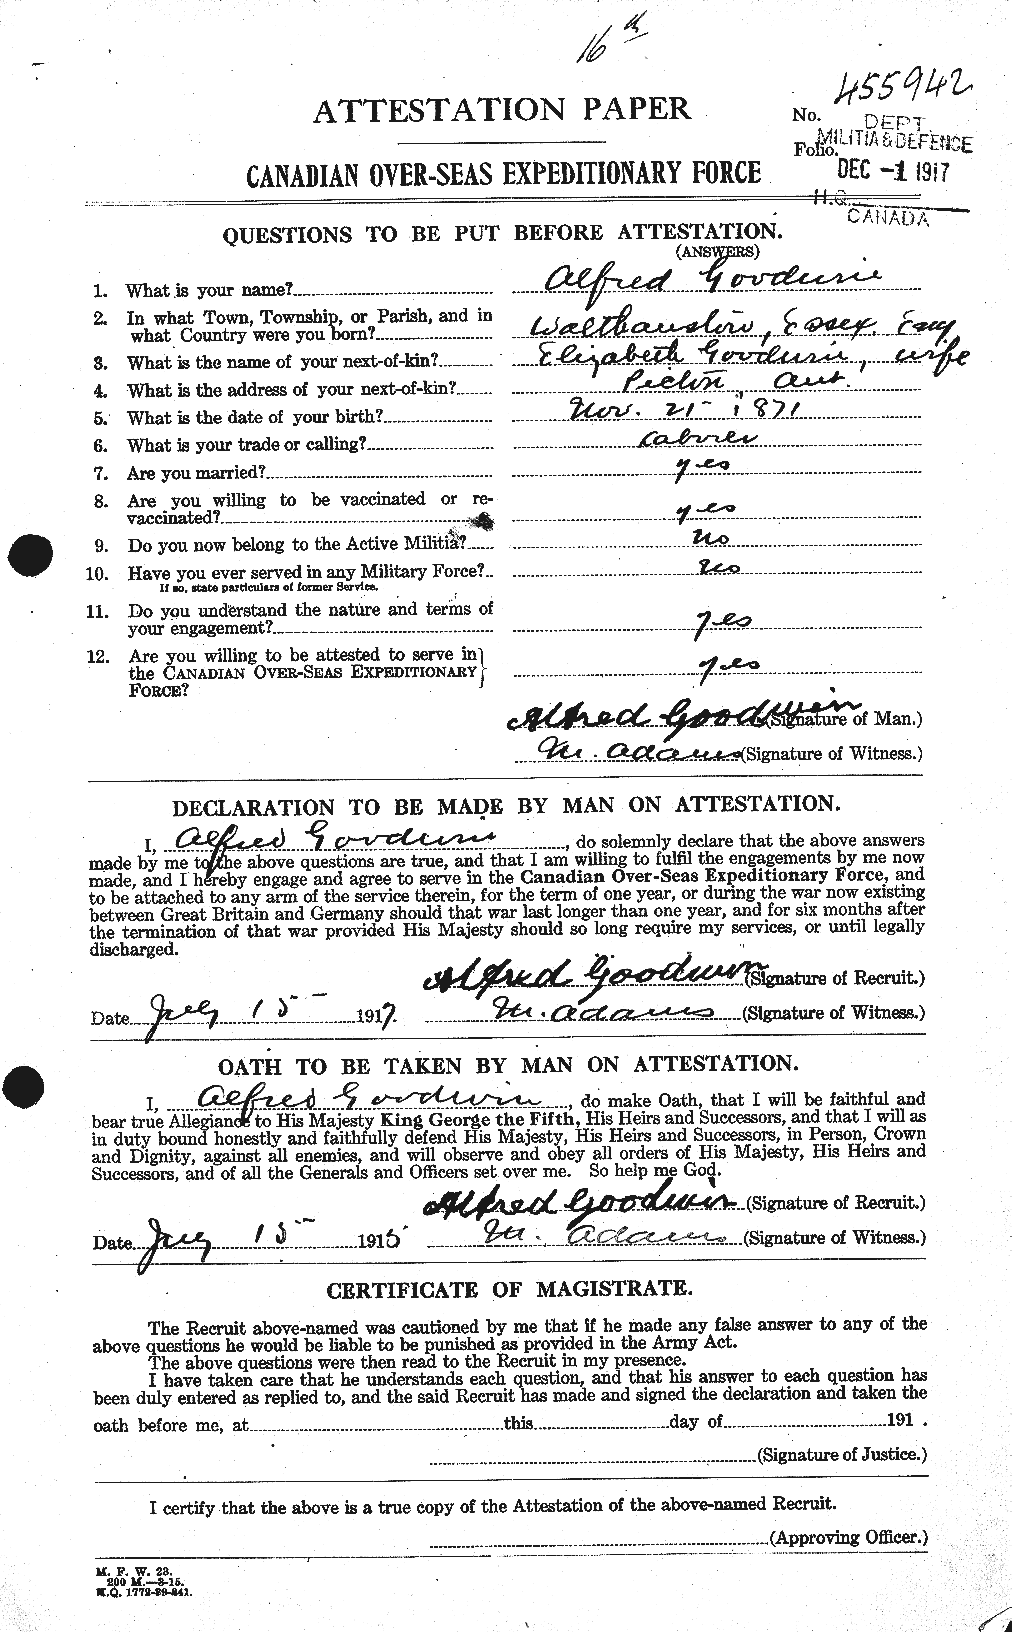 Personnel Records of the First World War - CEF 357924a